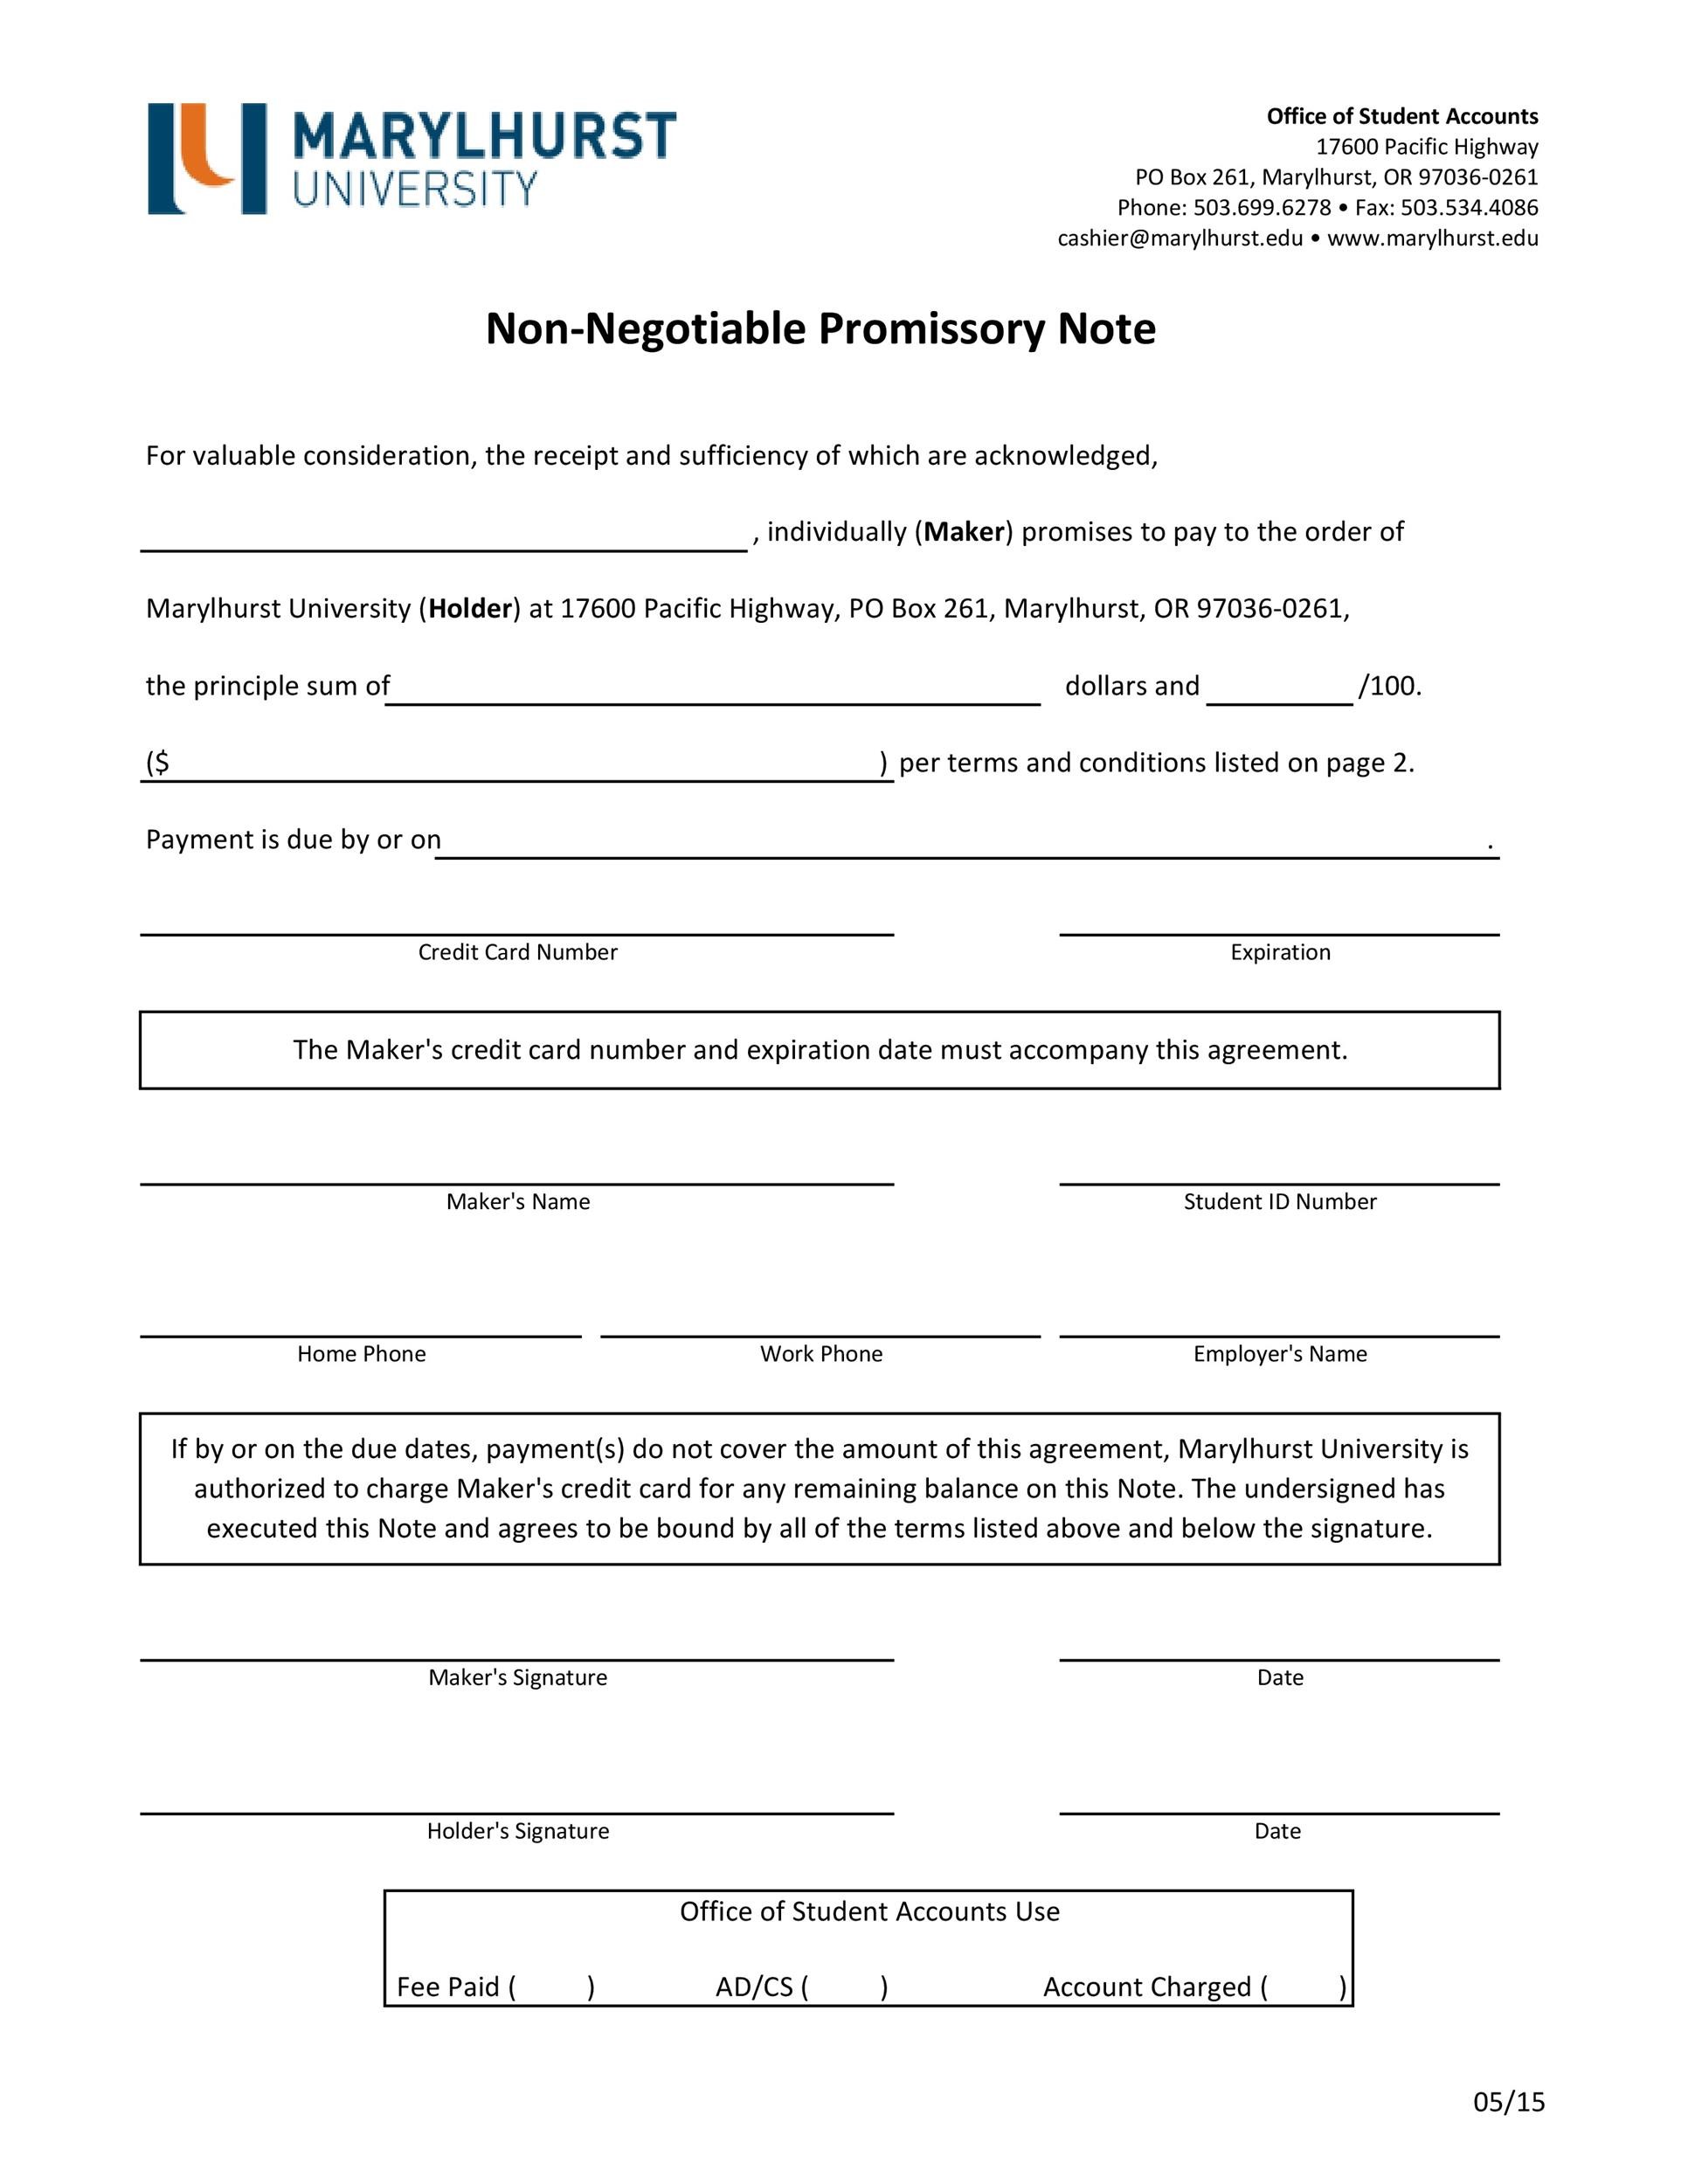 45-free-promissory-note-templates-forms-word-pdf-templatelab